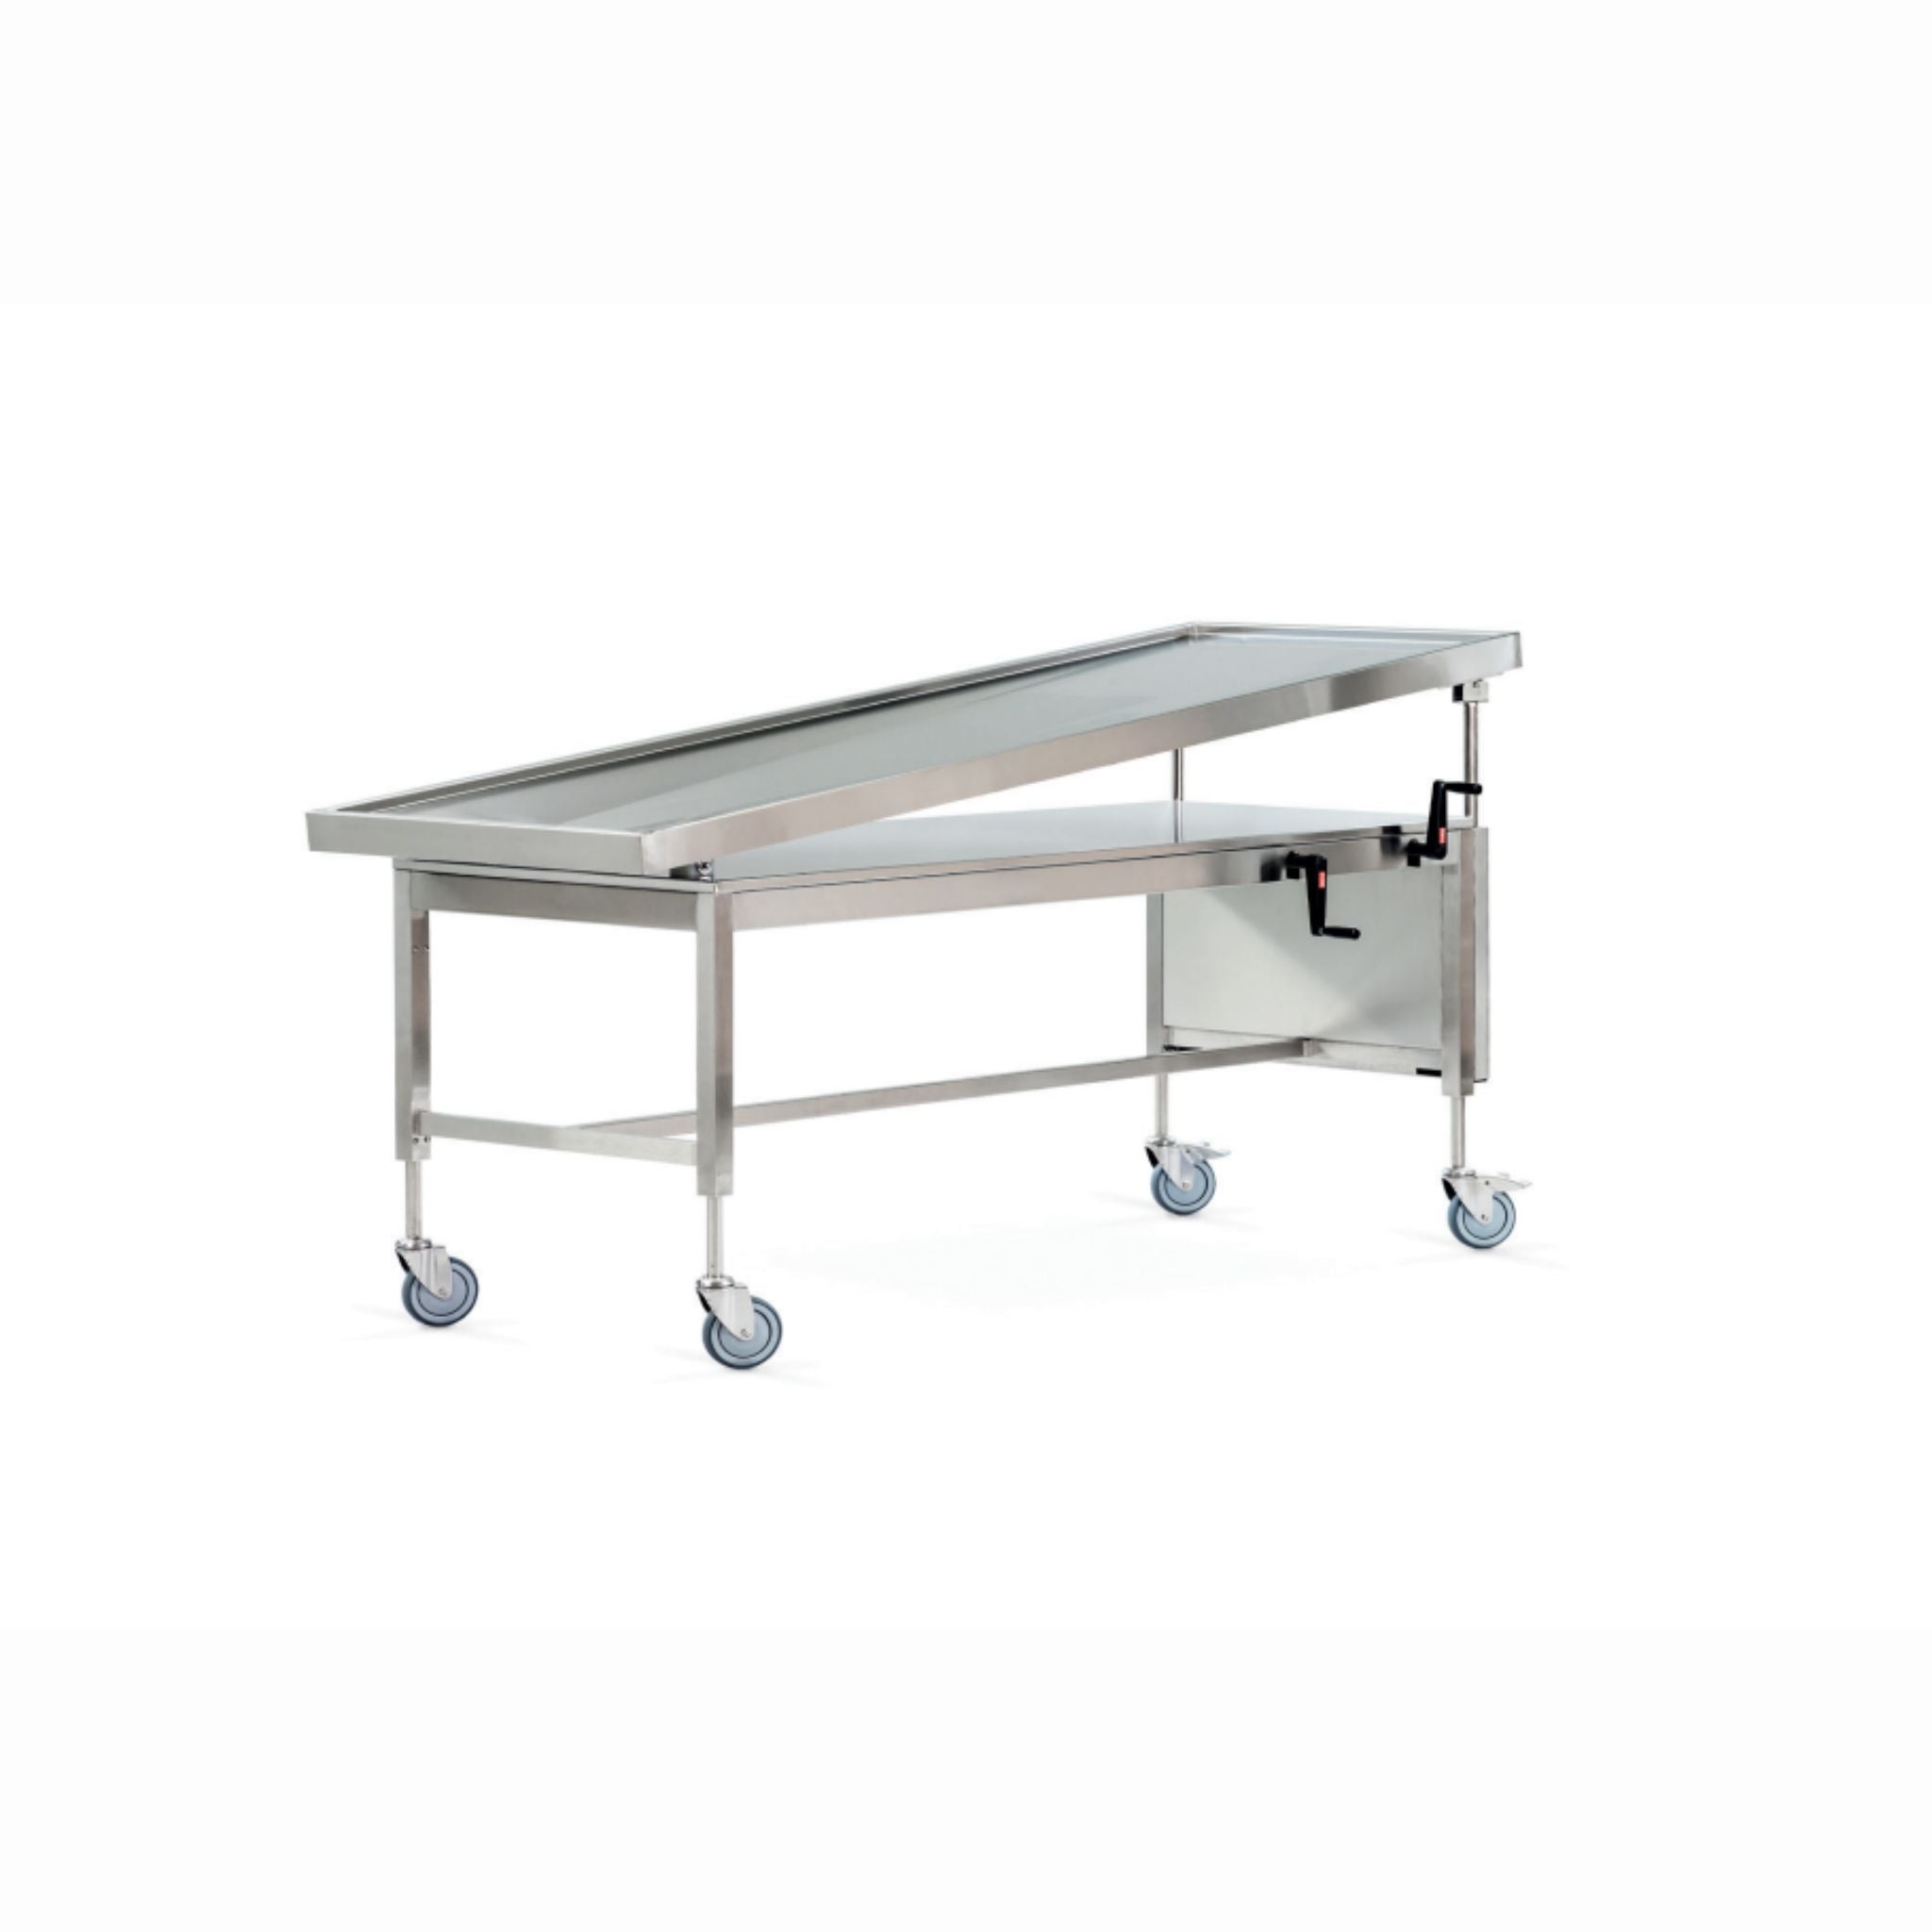 Height-adjustable and tiltable wash and dissection table